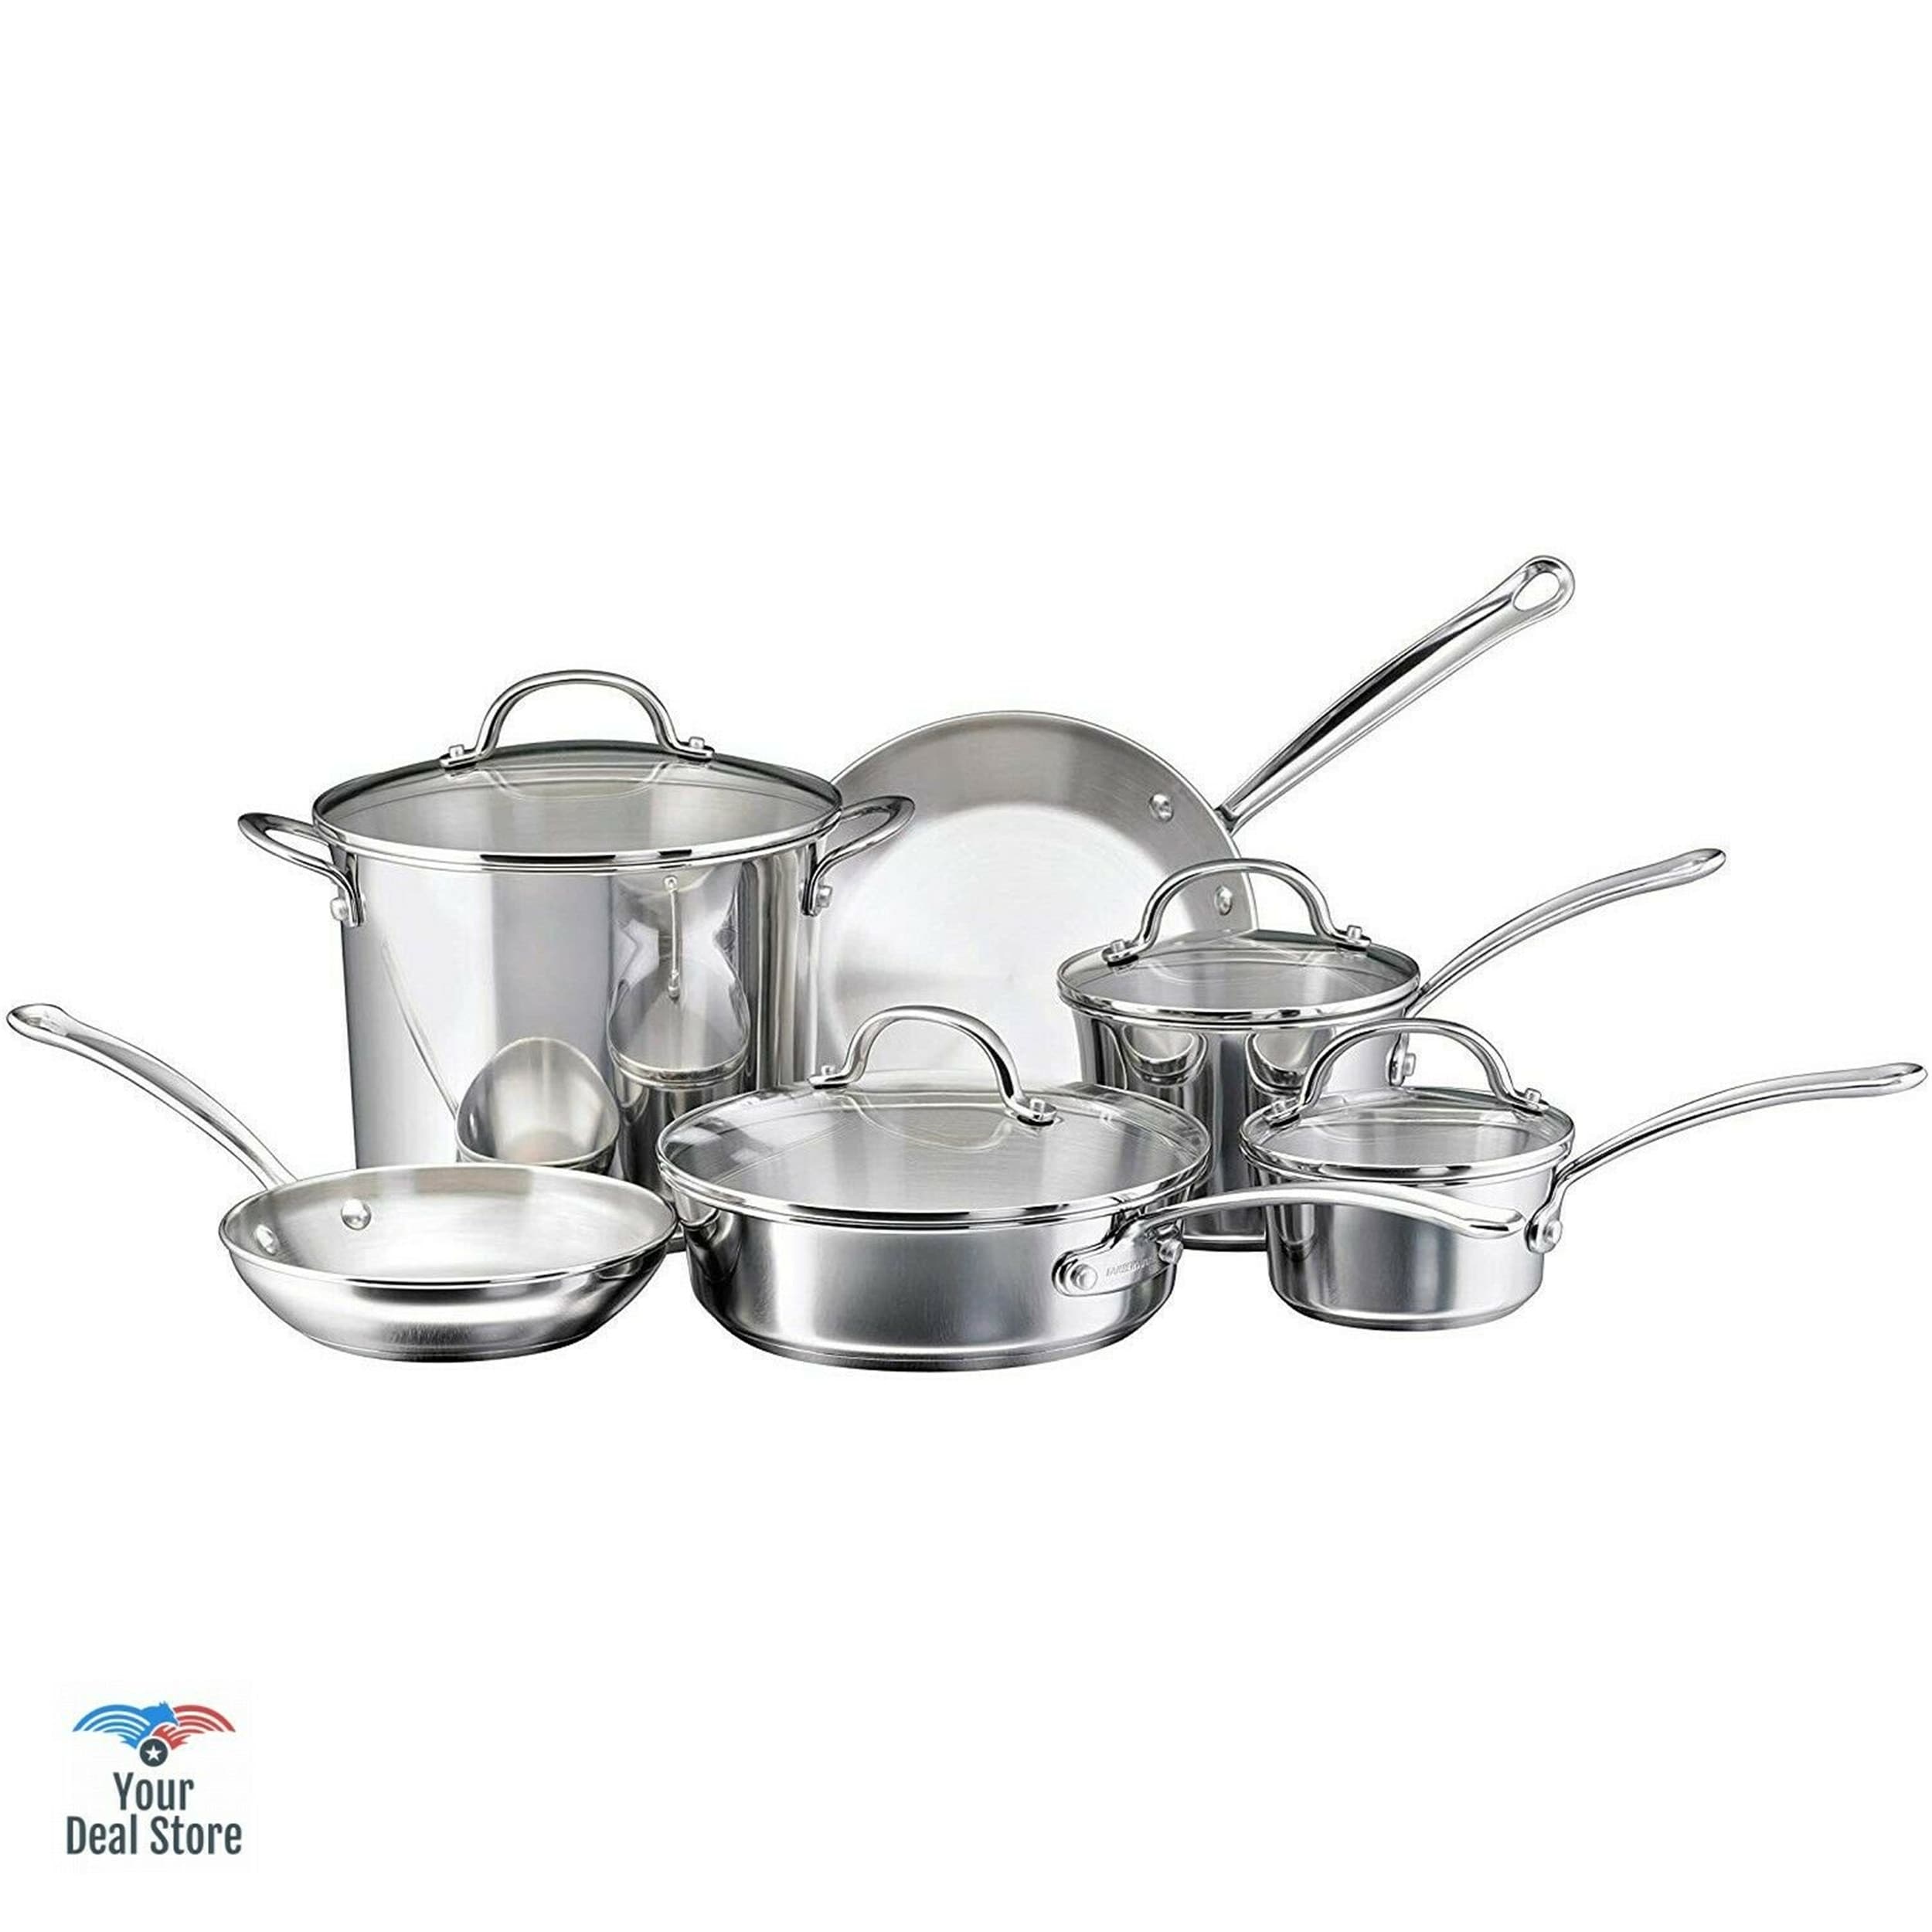 https://ak1.ostkcdn.com/images/products/is/images/direct/bde37adbc97cb591b2b0d8354a01b84f1c6d6c37/Induction-Cookware-Set-Stainless-Steel-Pots-And-Pans-Frying-Pan-Skillet-With-Lid.jpg